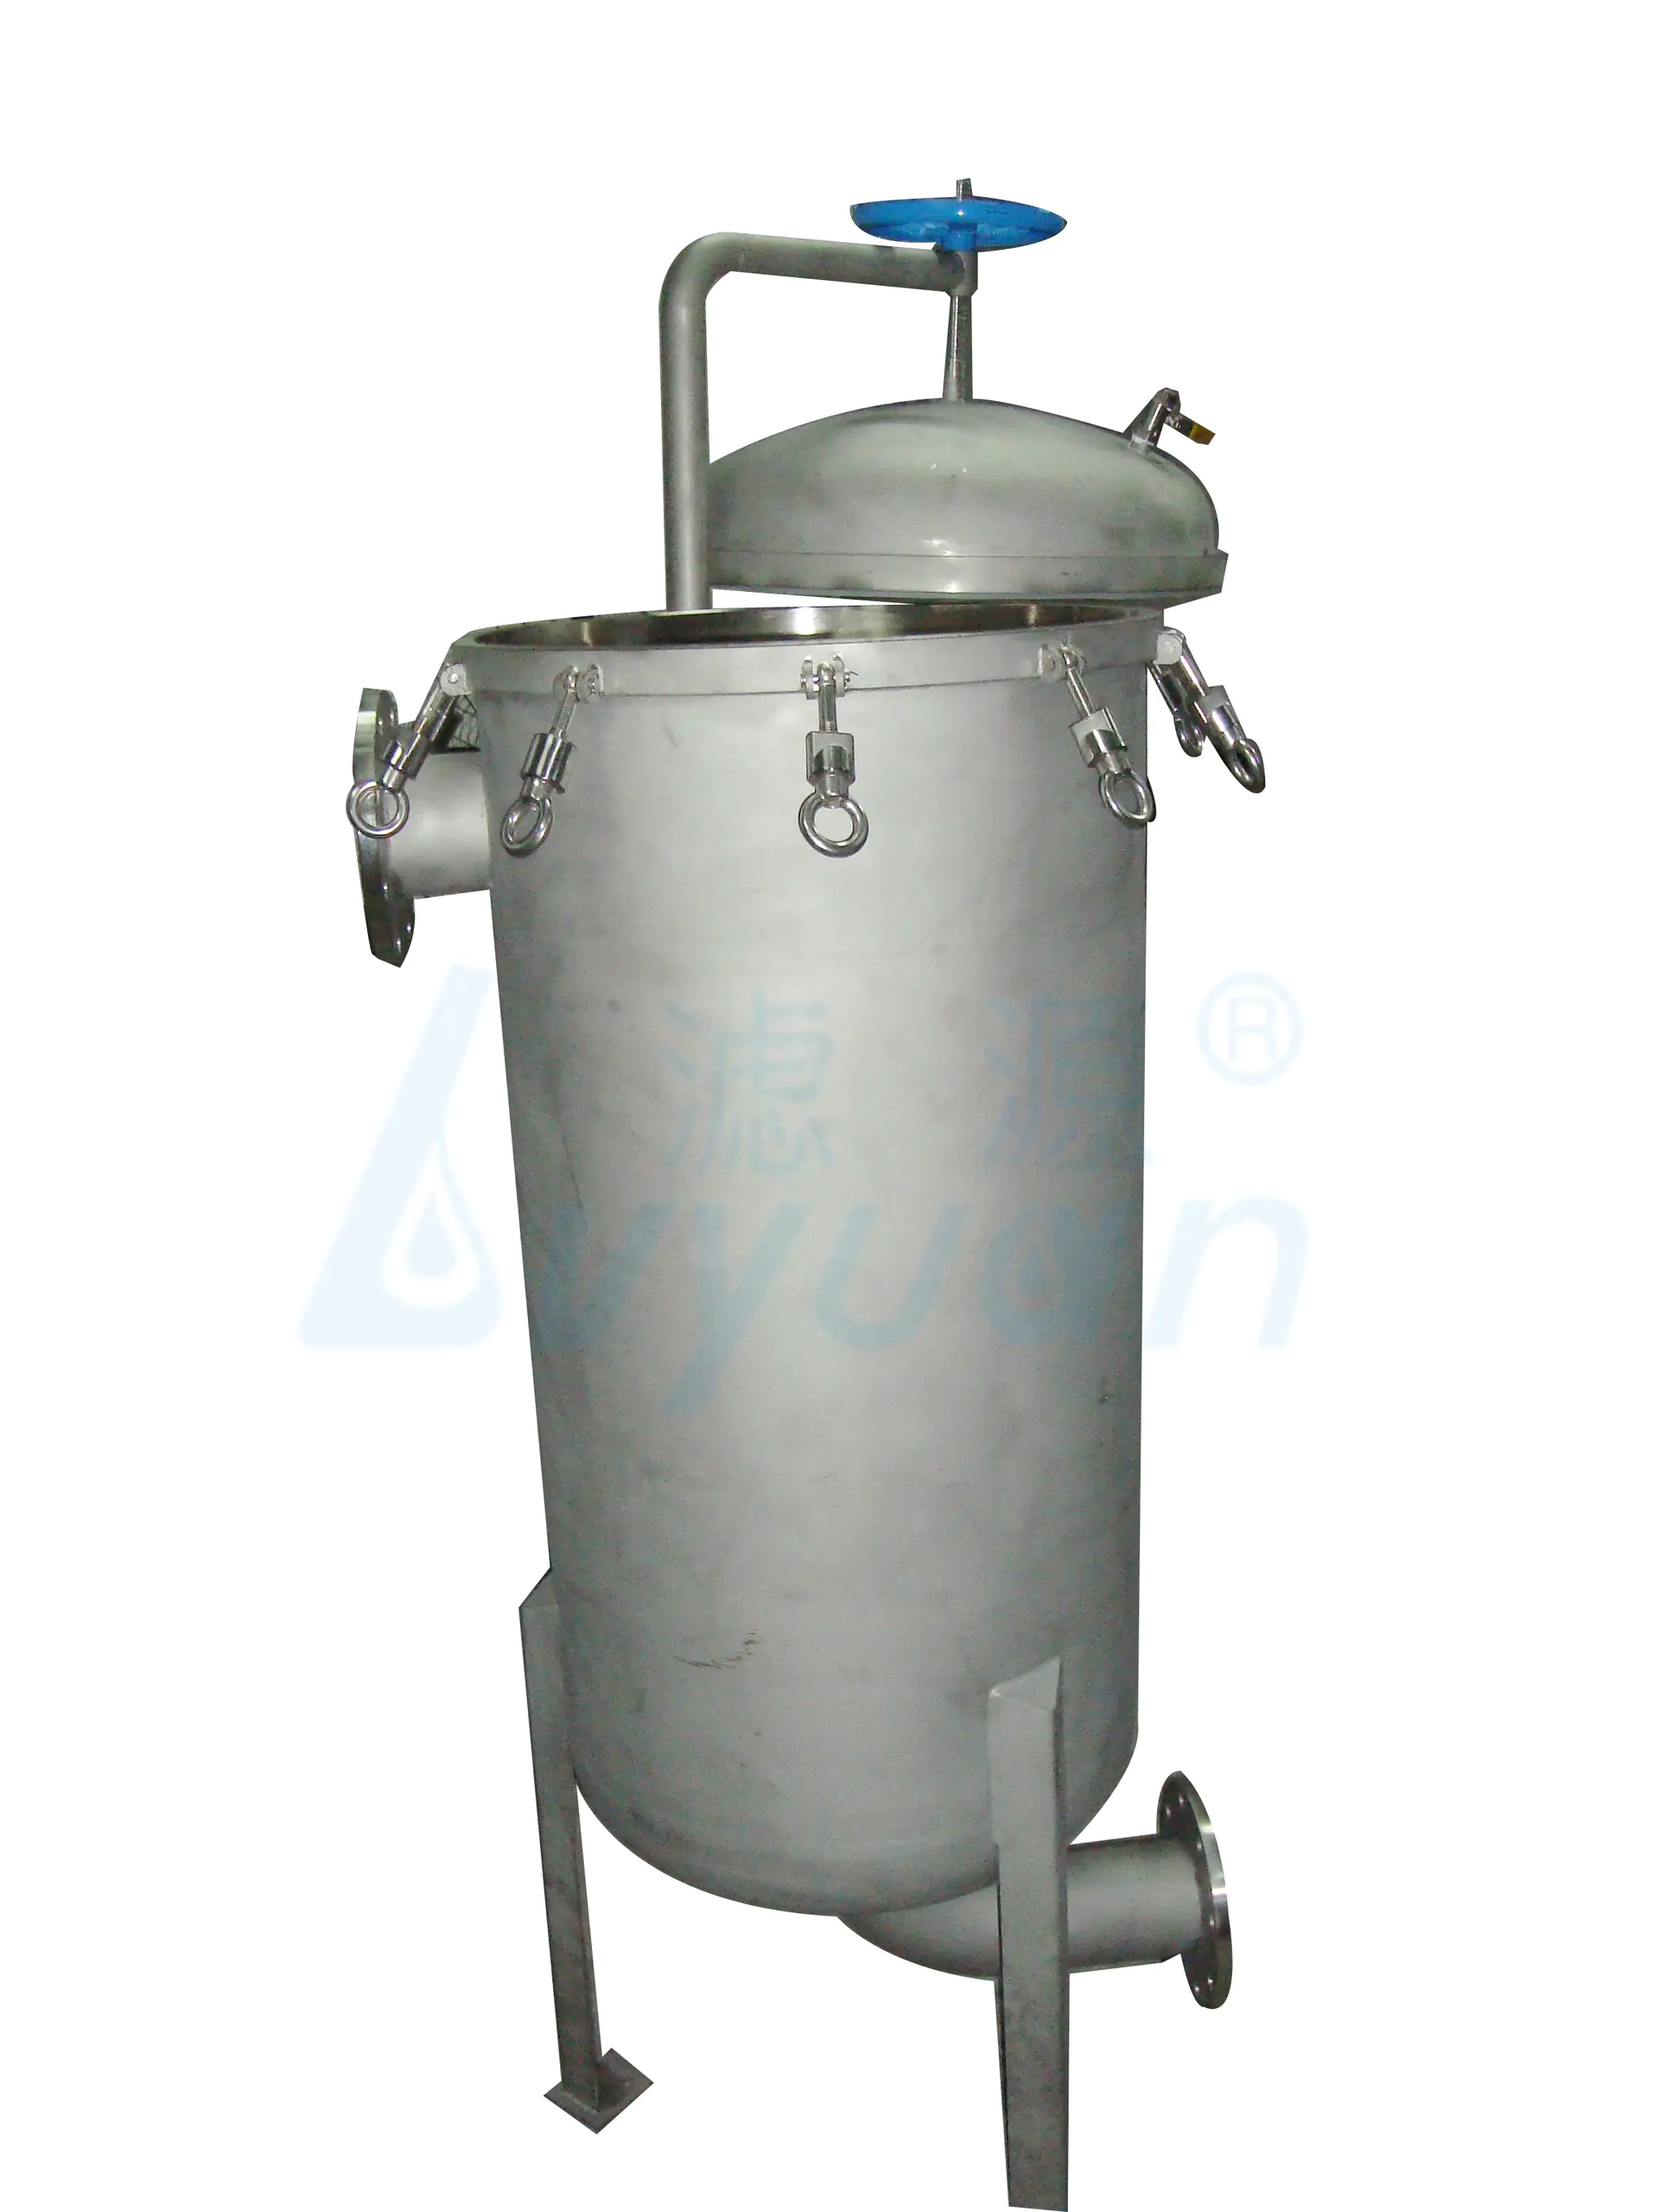 SS304 Multi Bag Filter Housing/stainless steel water filter housing for liquid filtration system